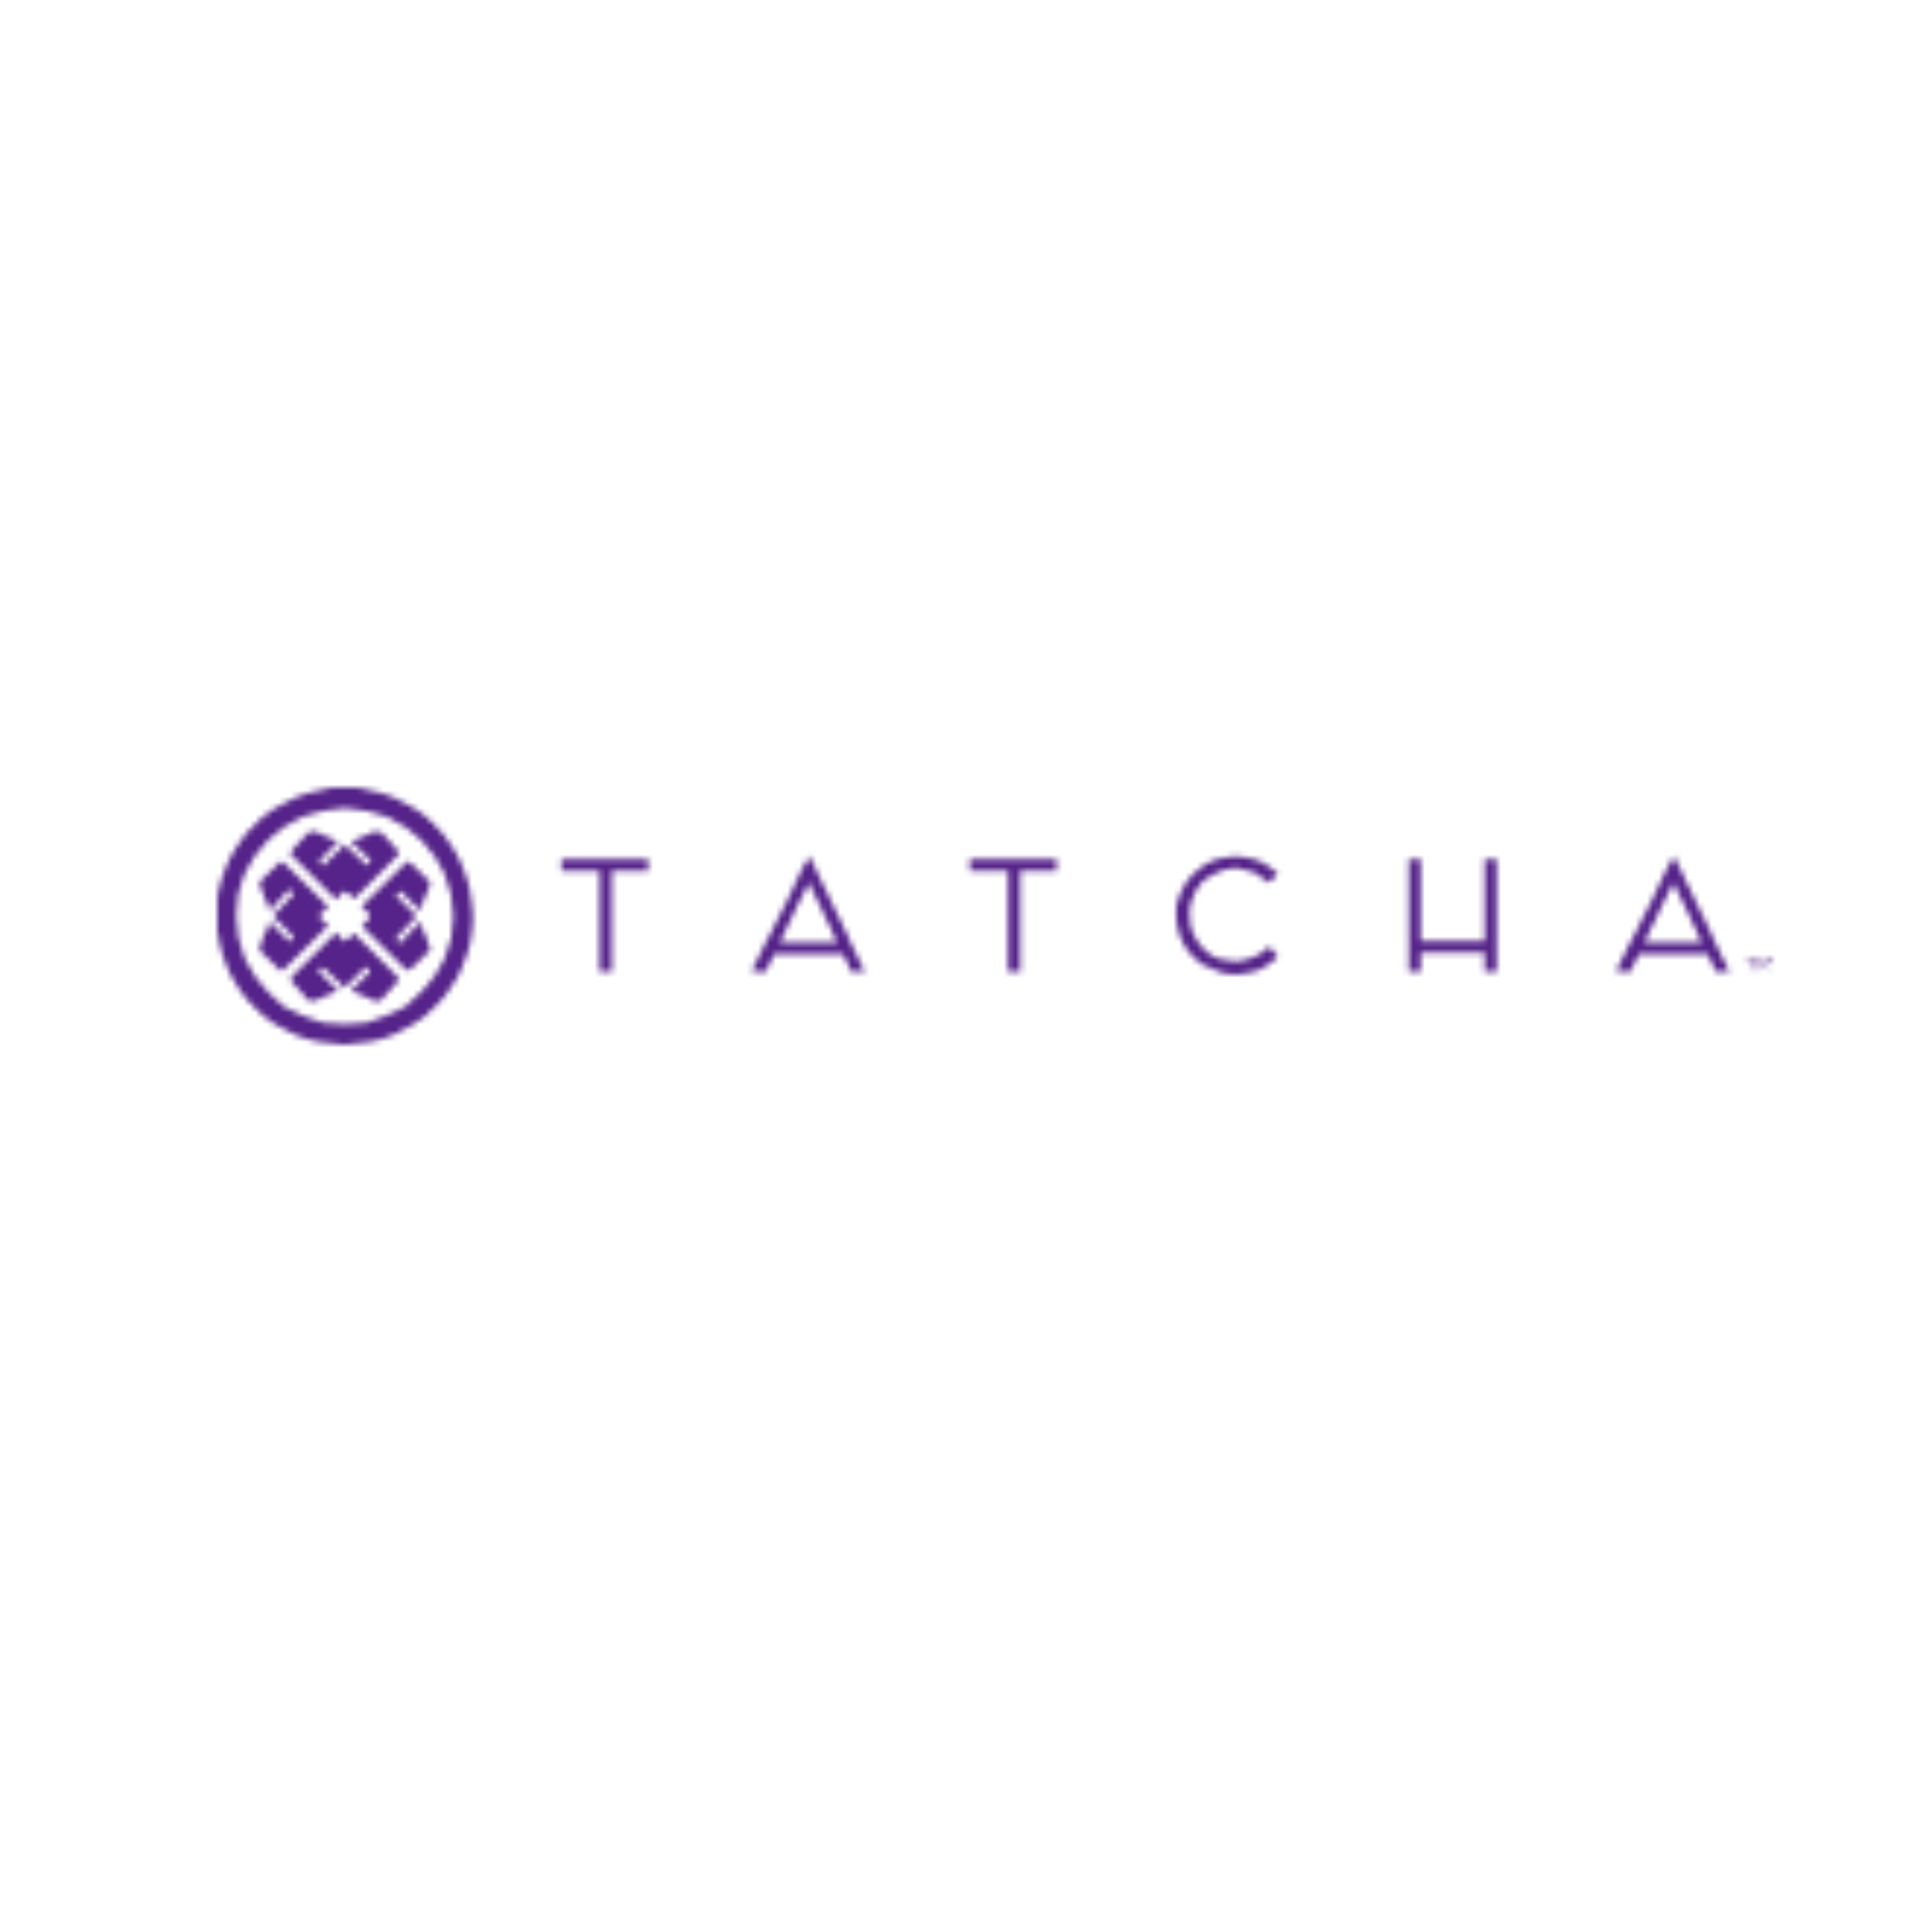 Tatcha: 25% OFF EVERYTHING + FREE MYSTERY GIFT